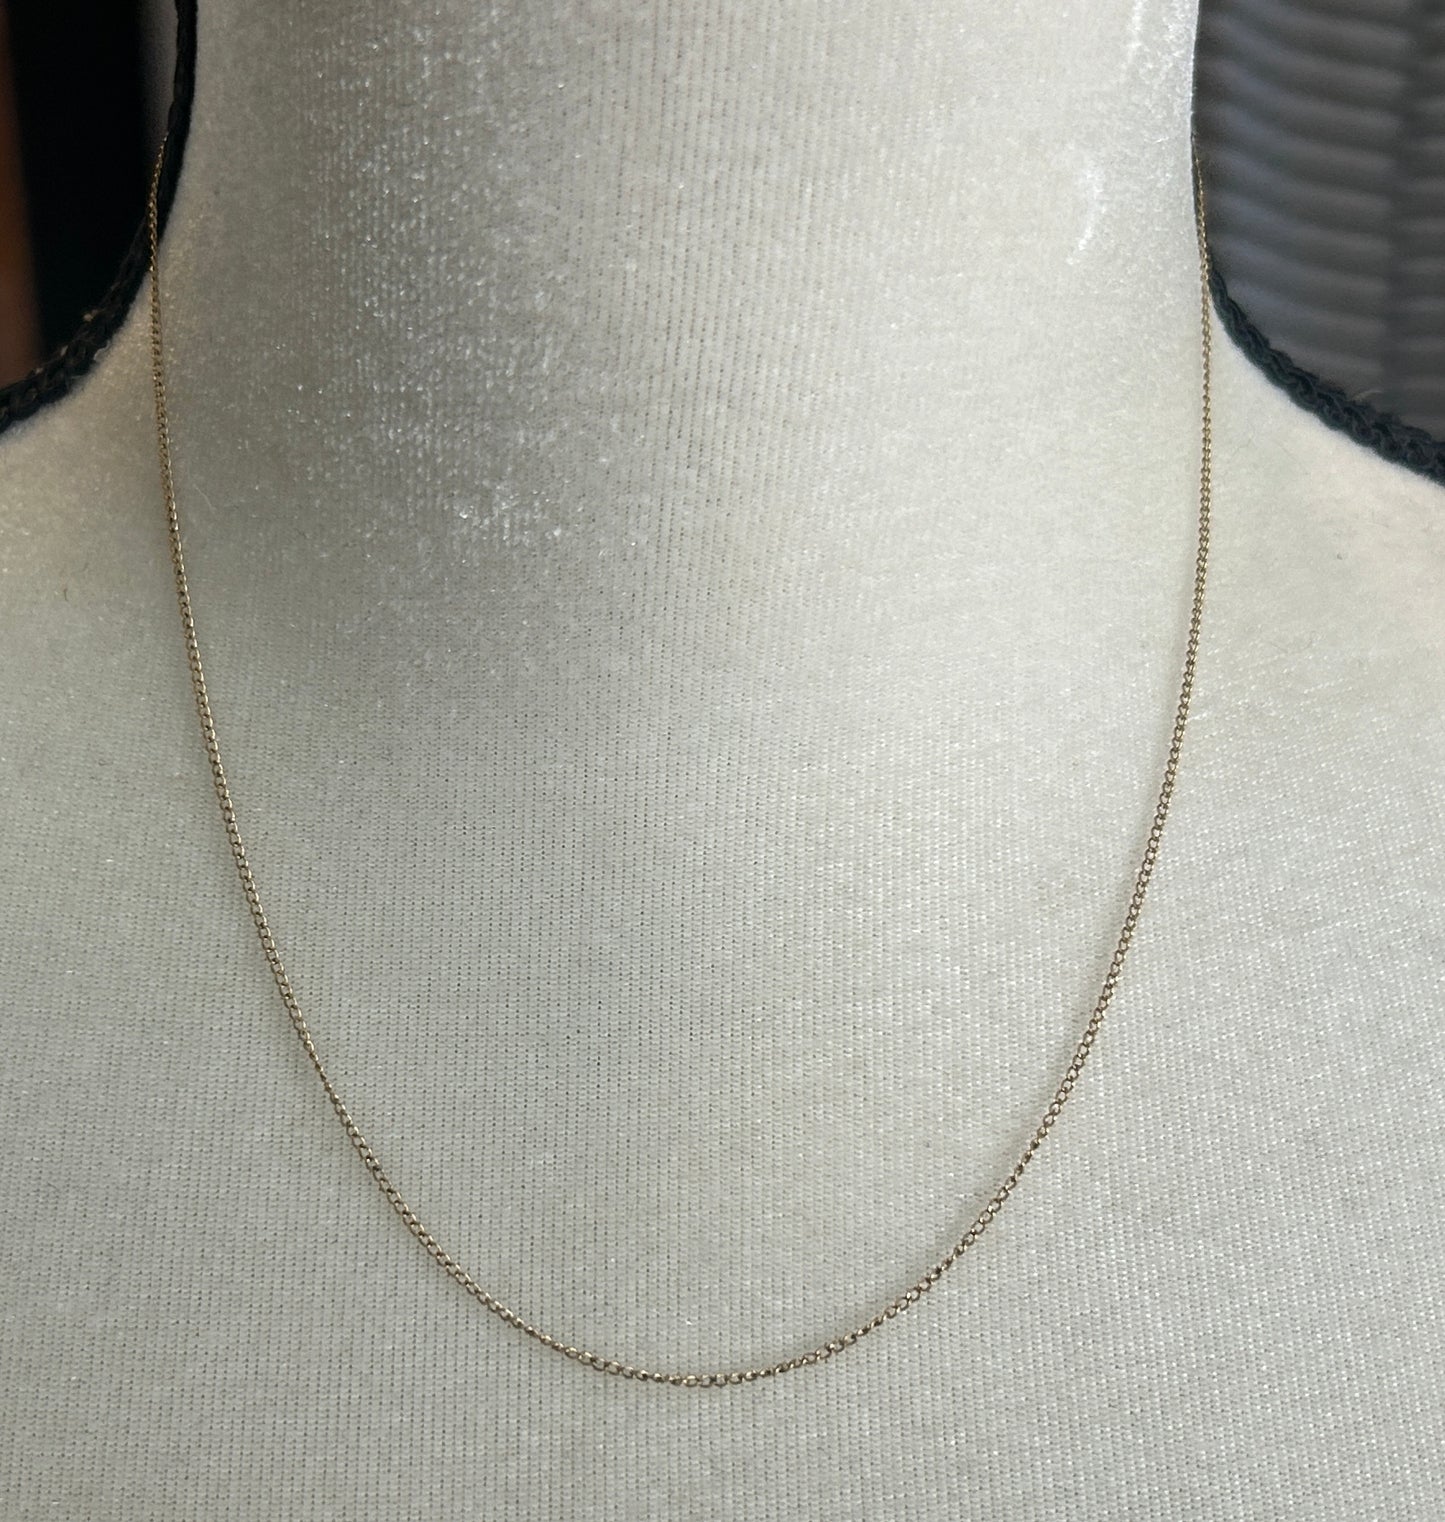 Vintage 14k Gold Filled Thin Chain Necklace 18" Long x 1mm Wide